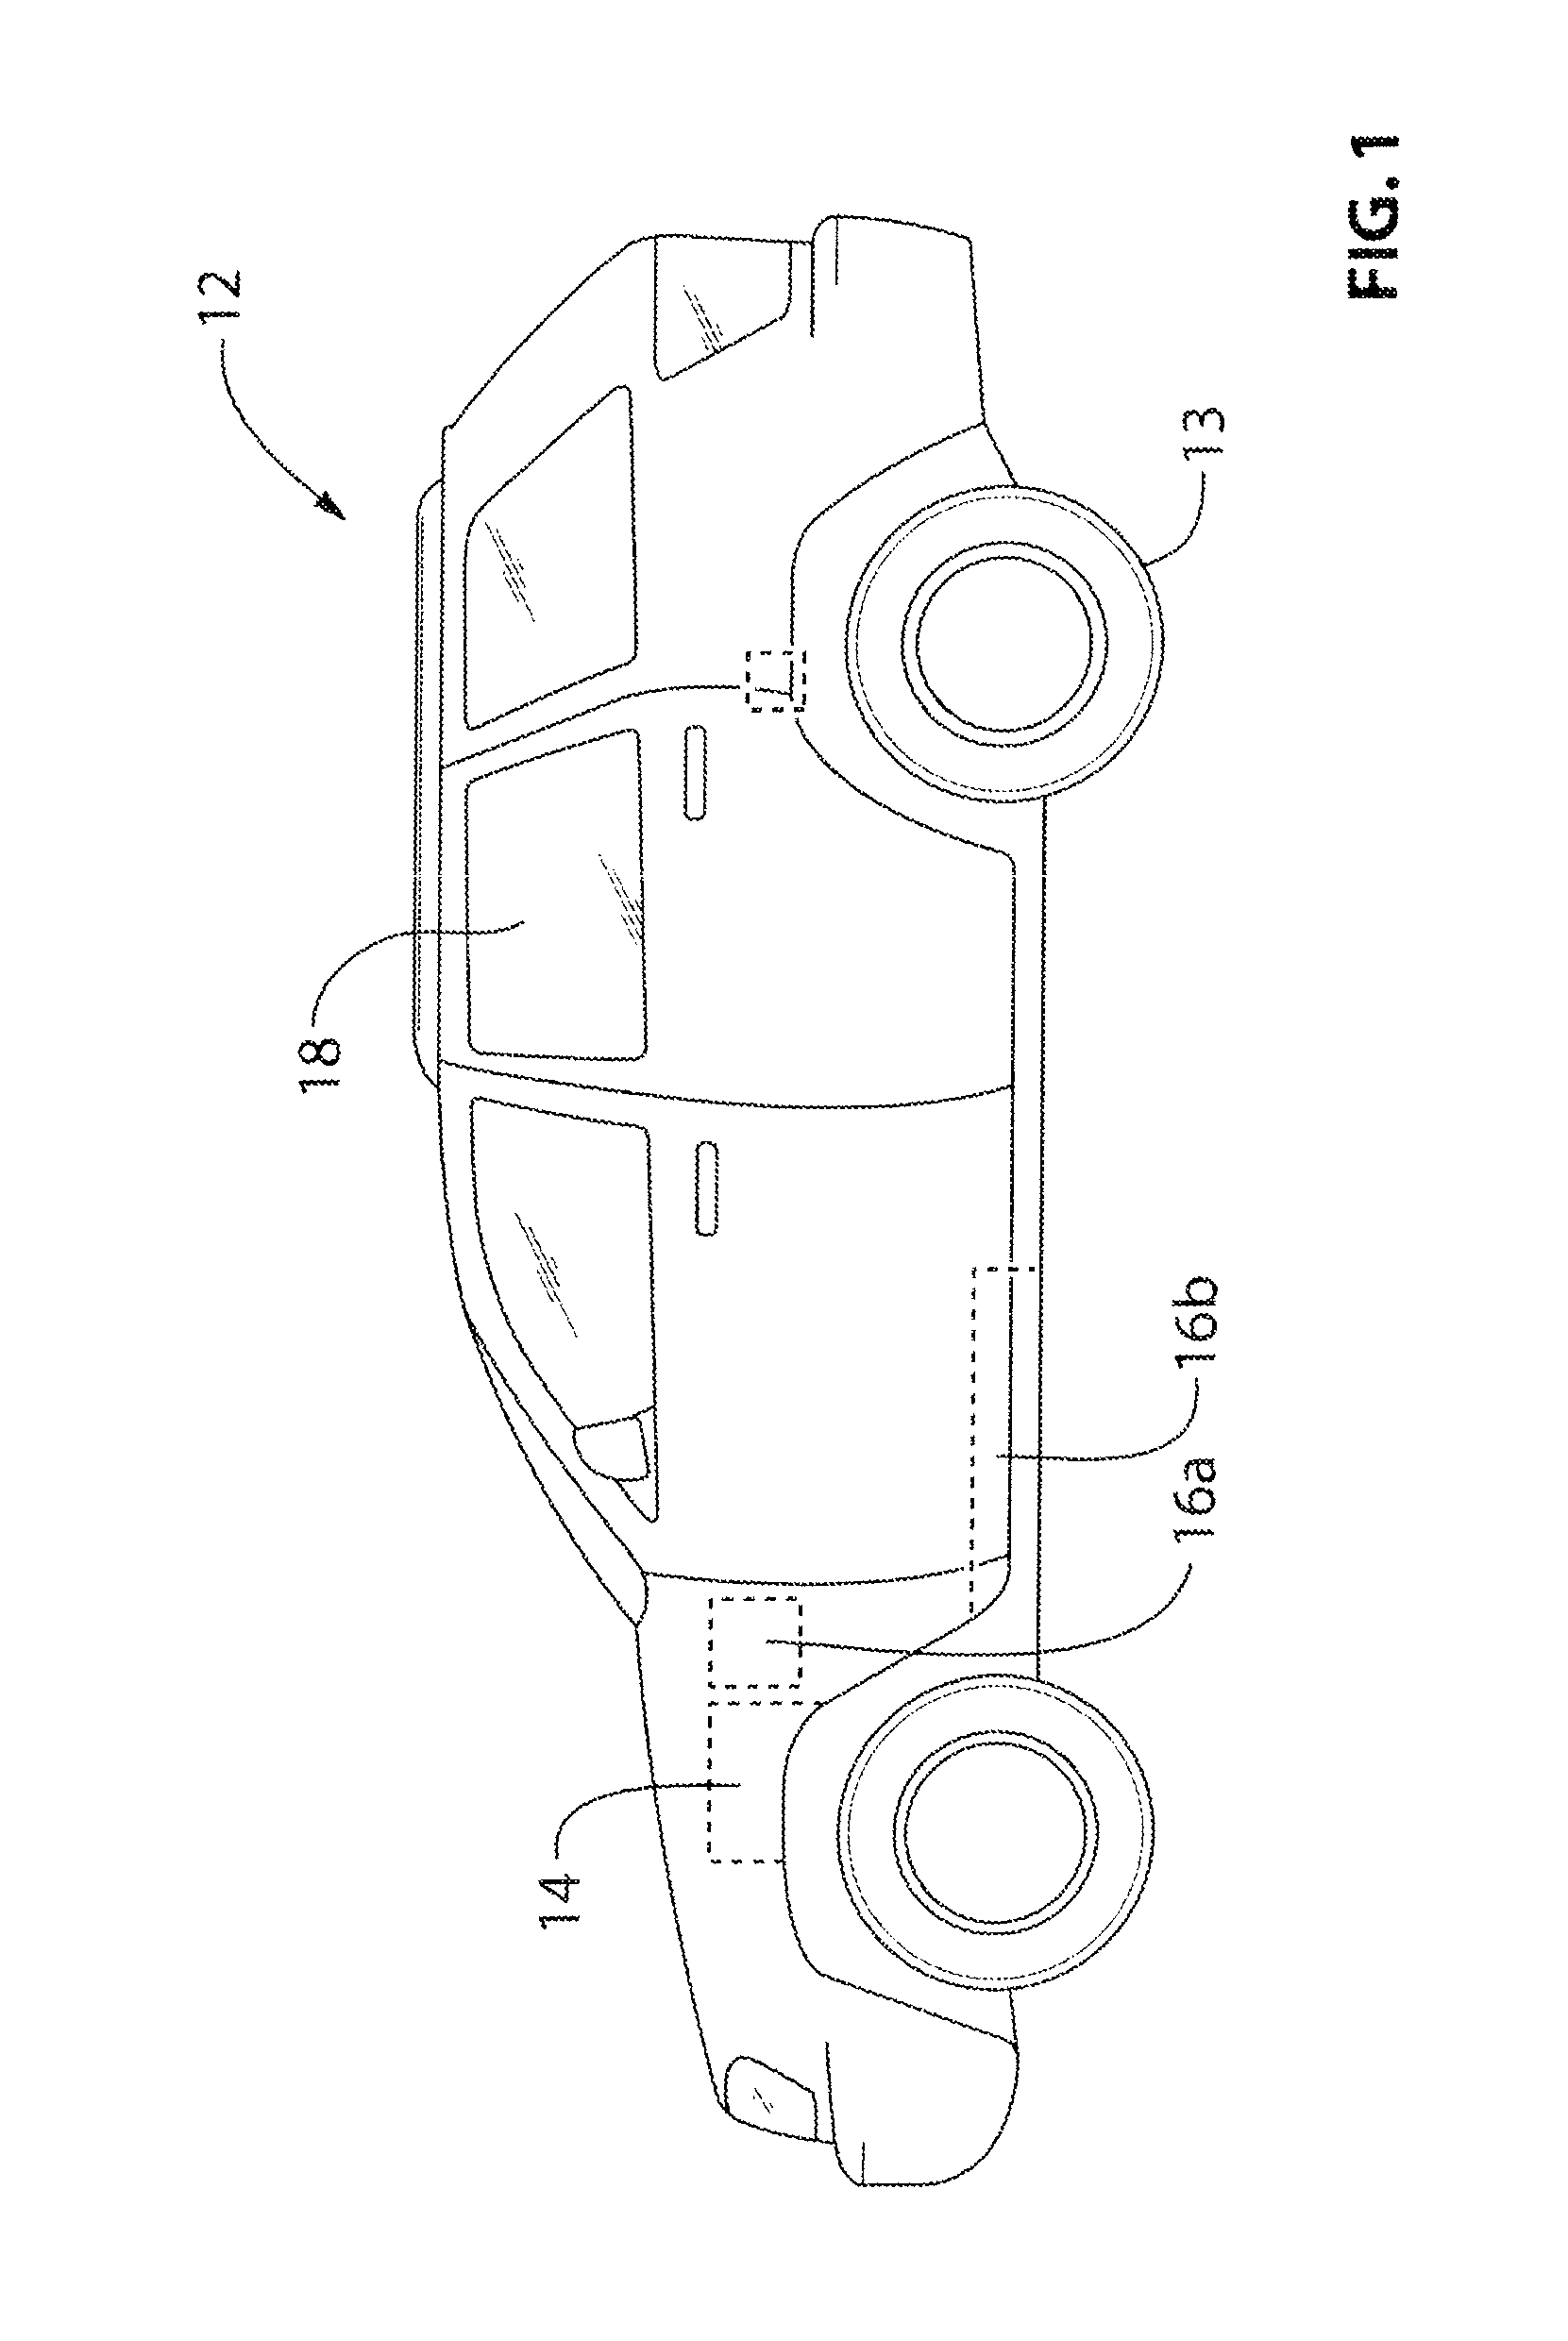 Vehicle with traction motor with preemptive cooling of motor fluid circuit prior to cooling of battery fluid circuit